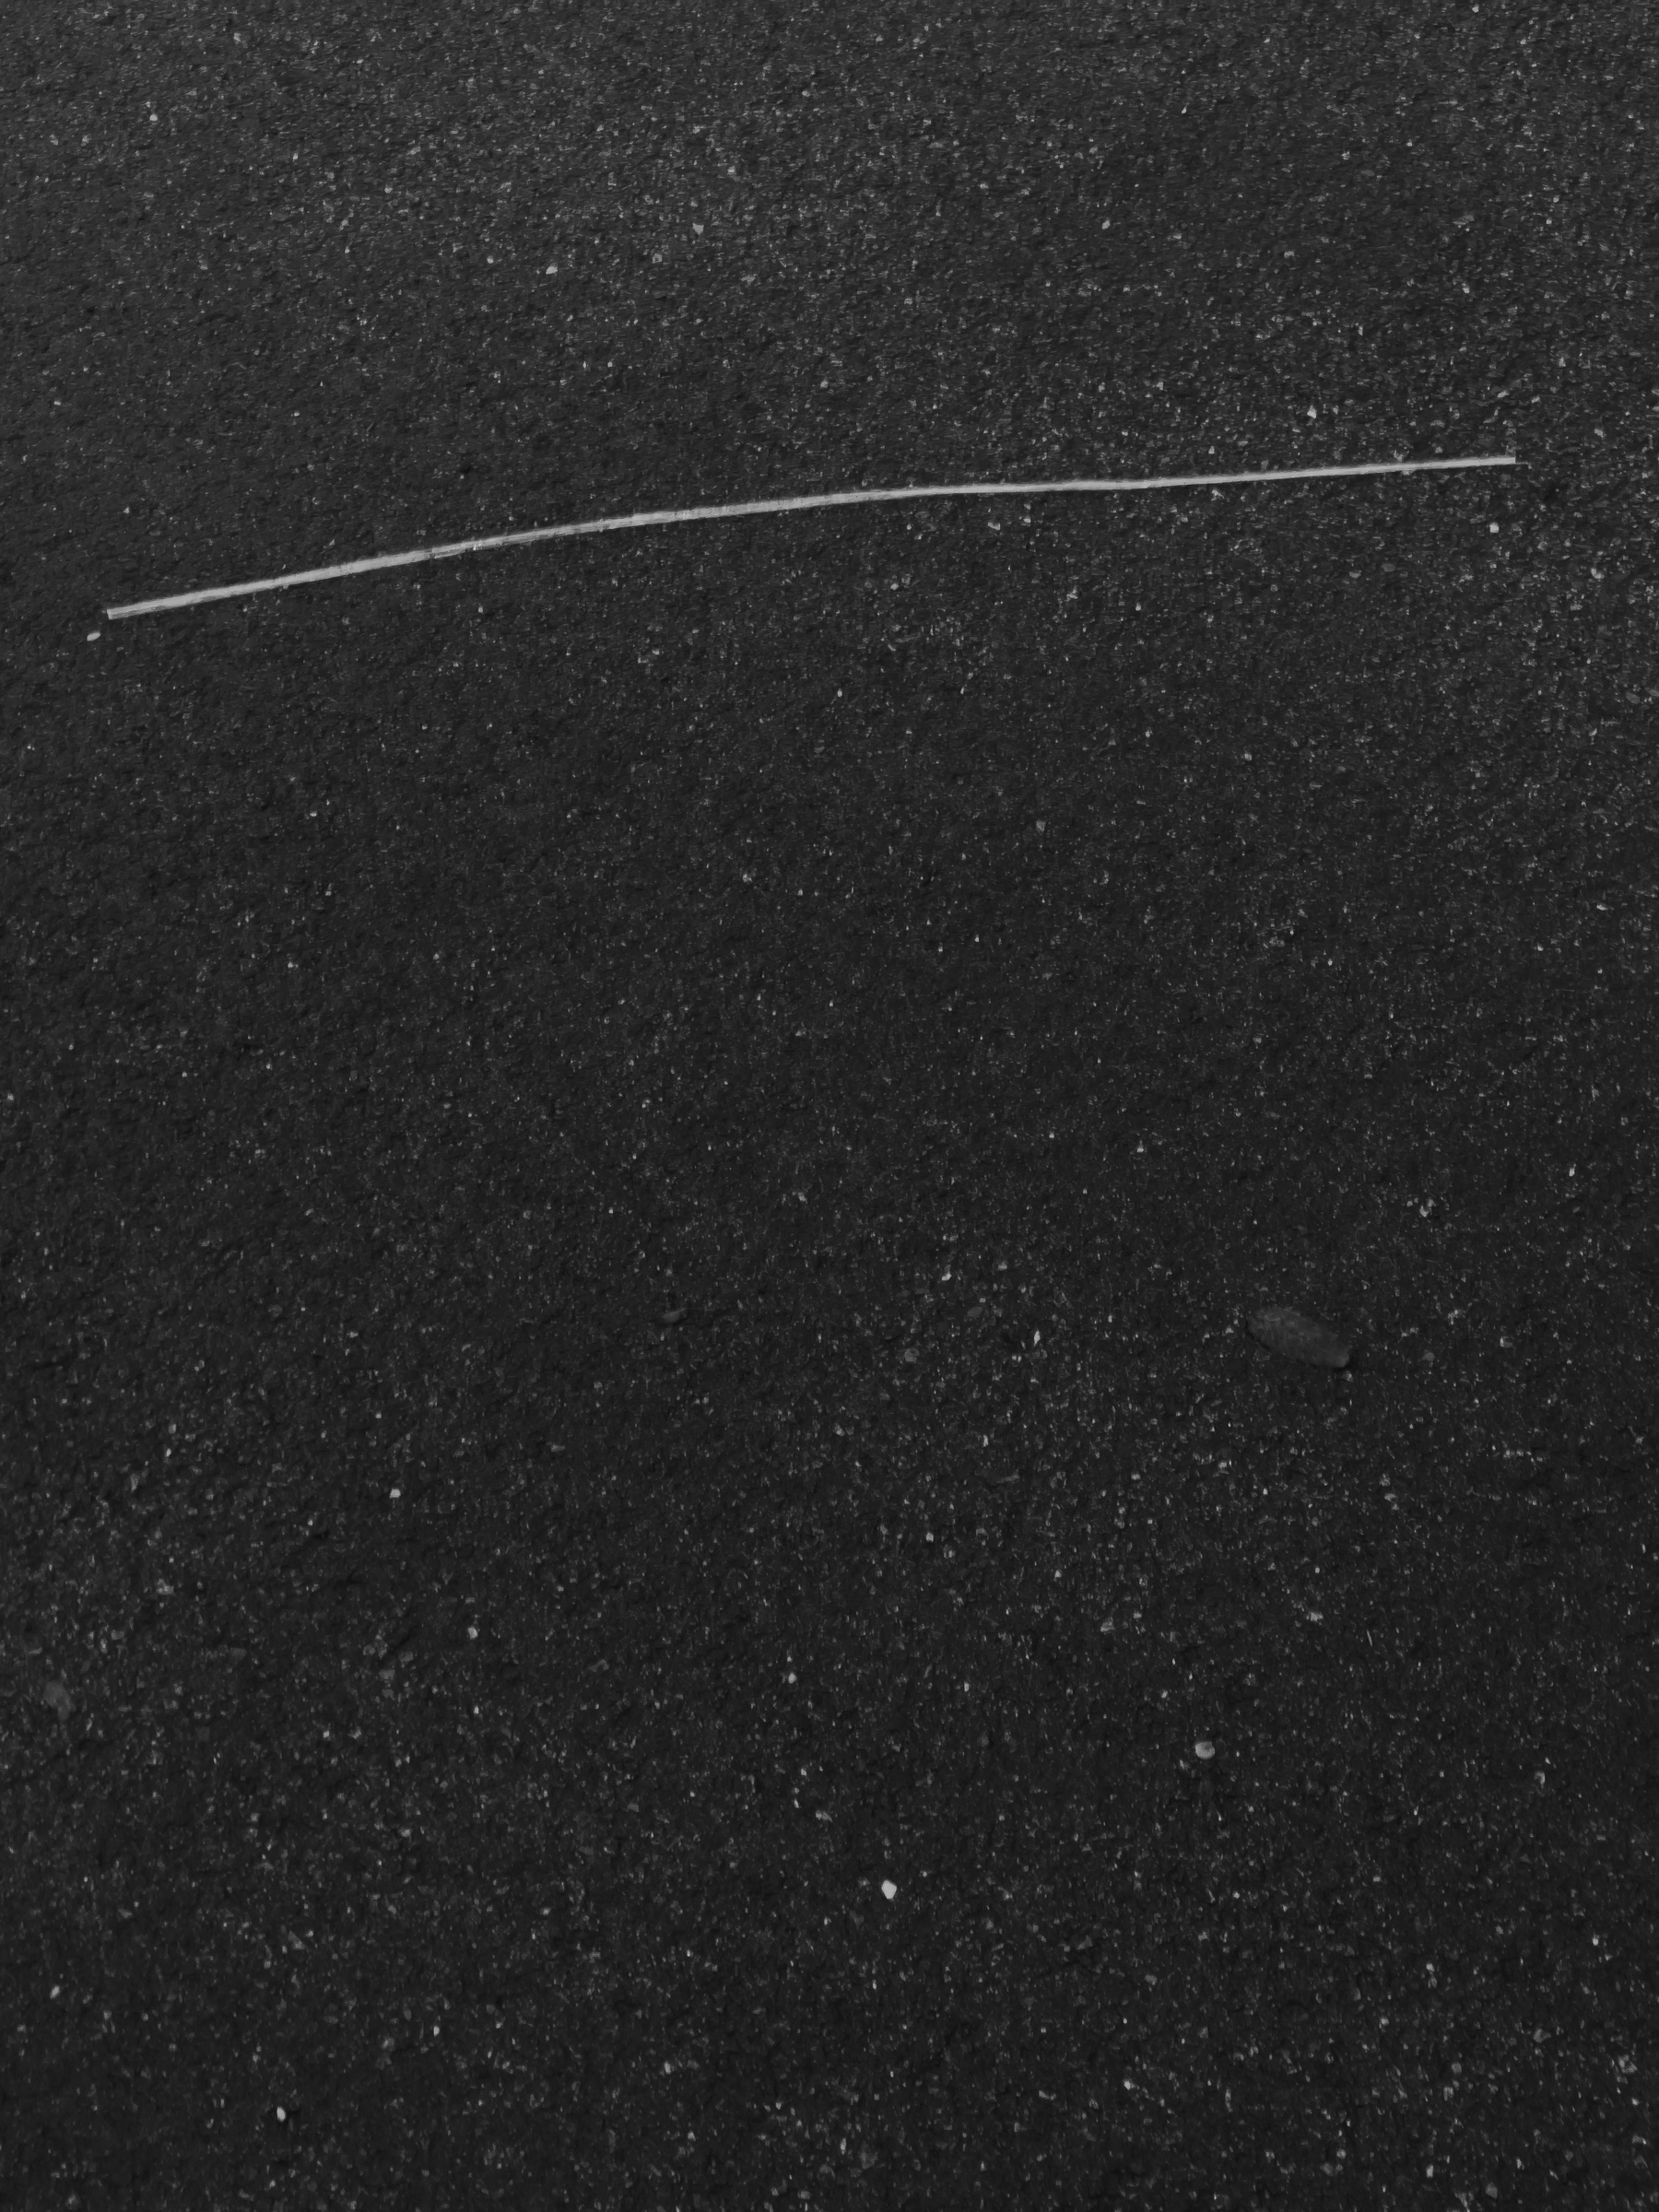 Abstract composition of gently curved strip of plastic running across top of vertically framed asphalt pavement section.